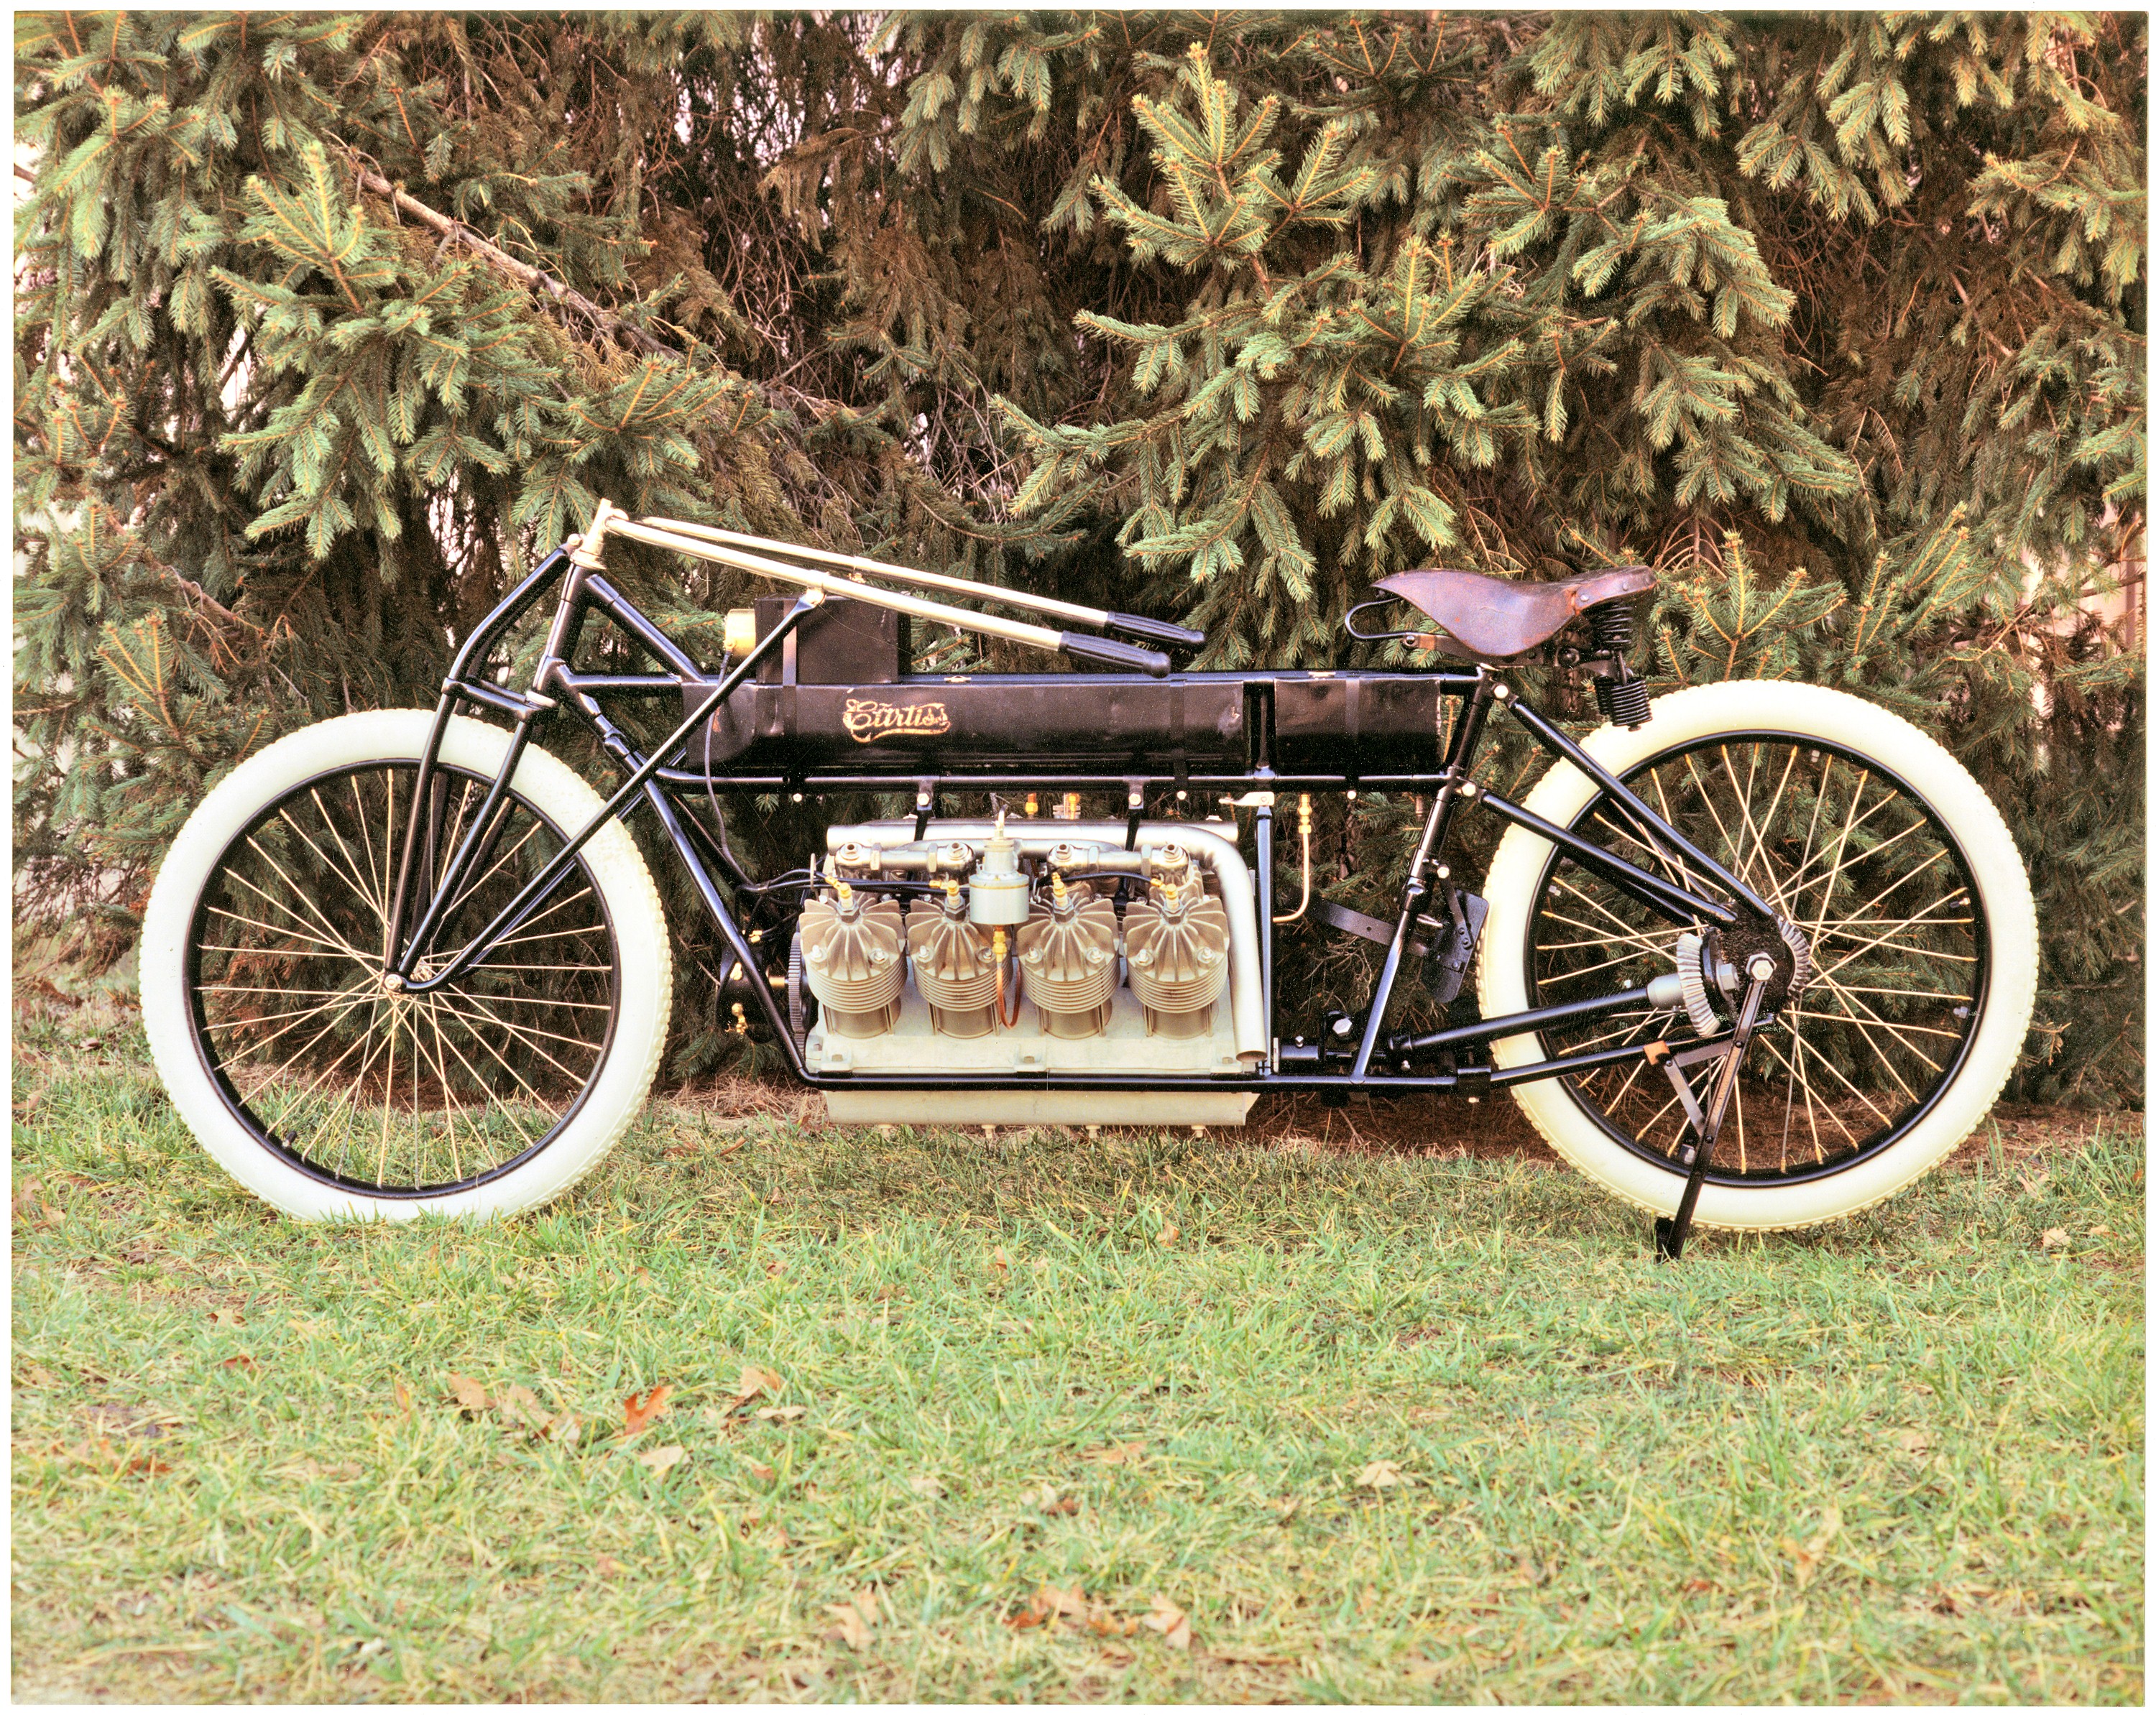 Curtiss Motorcycle at the Smithsonian Institute